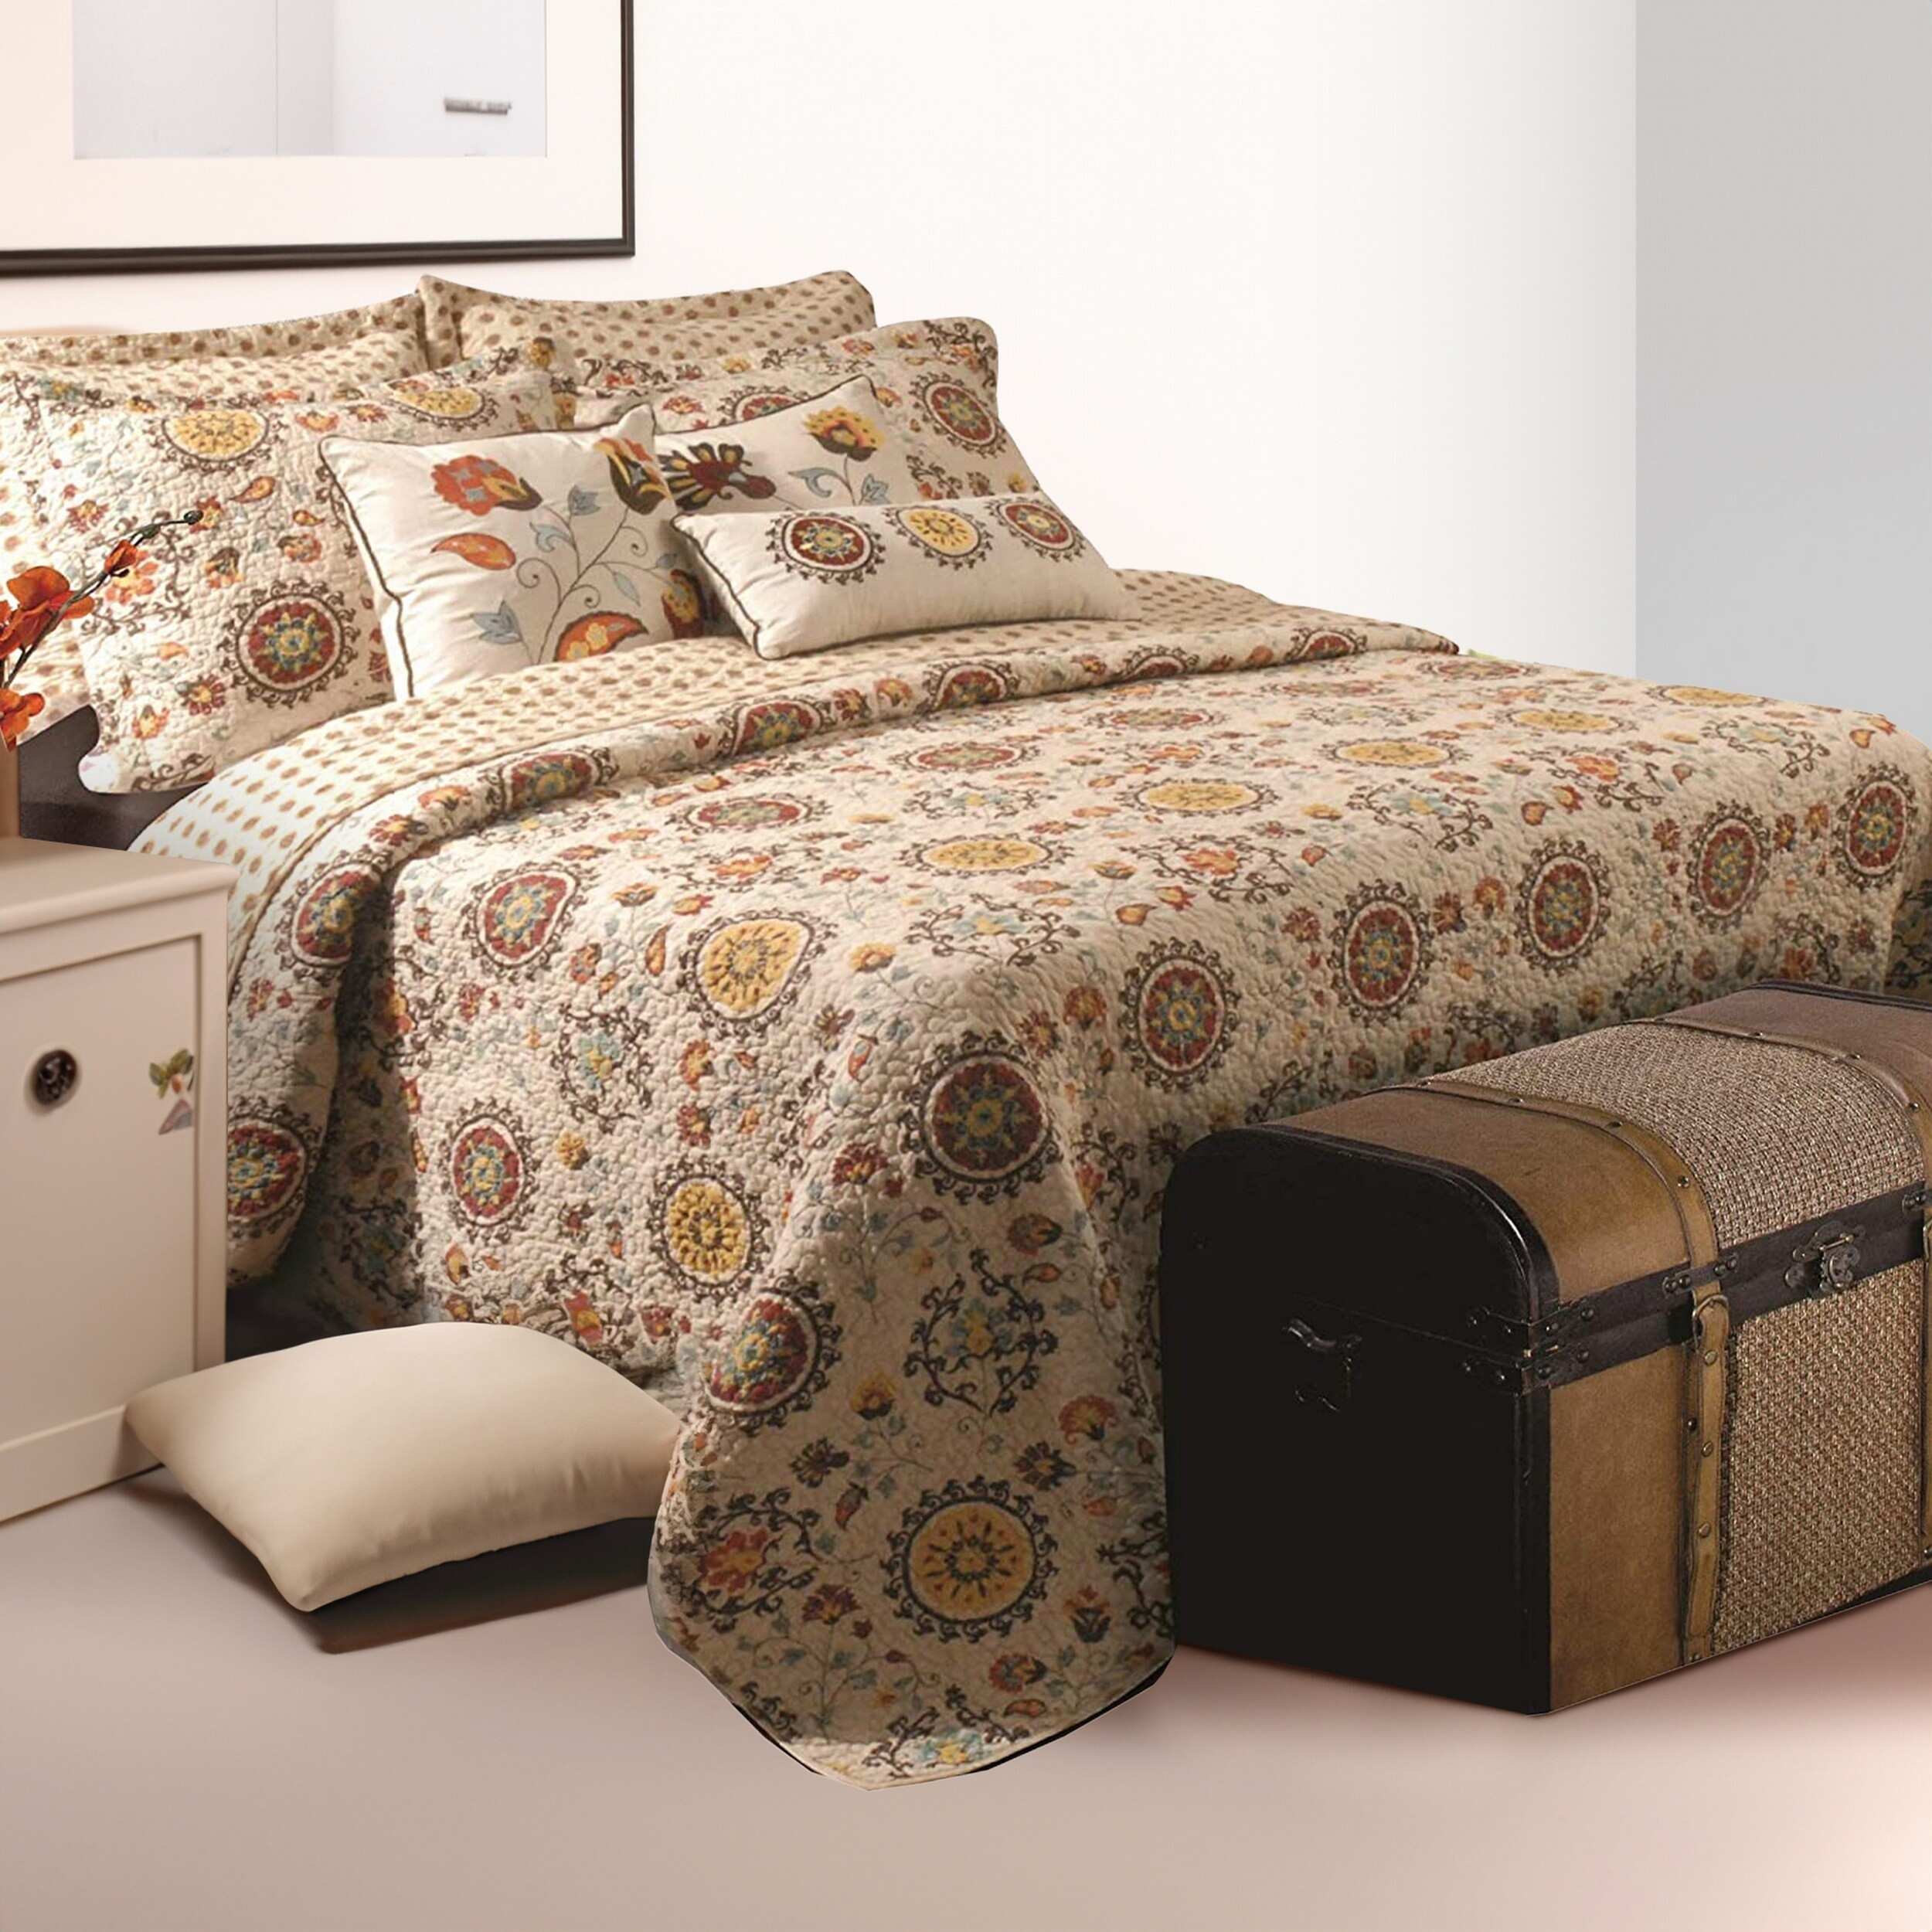 Elbe 5 Piece Queen Quilt Set with Medallion and Floral Pattern, Beige and Brown